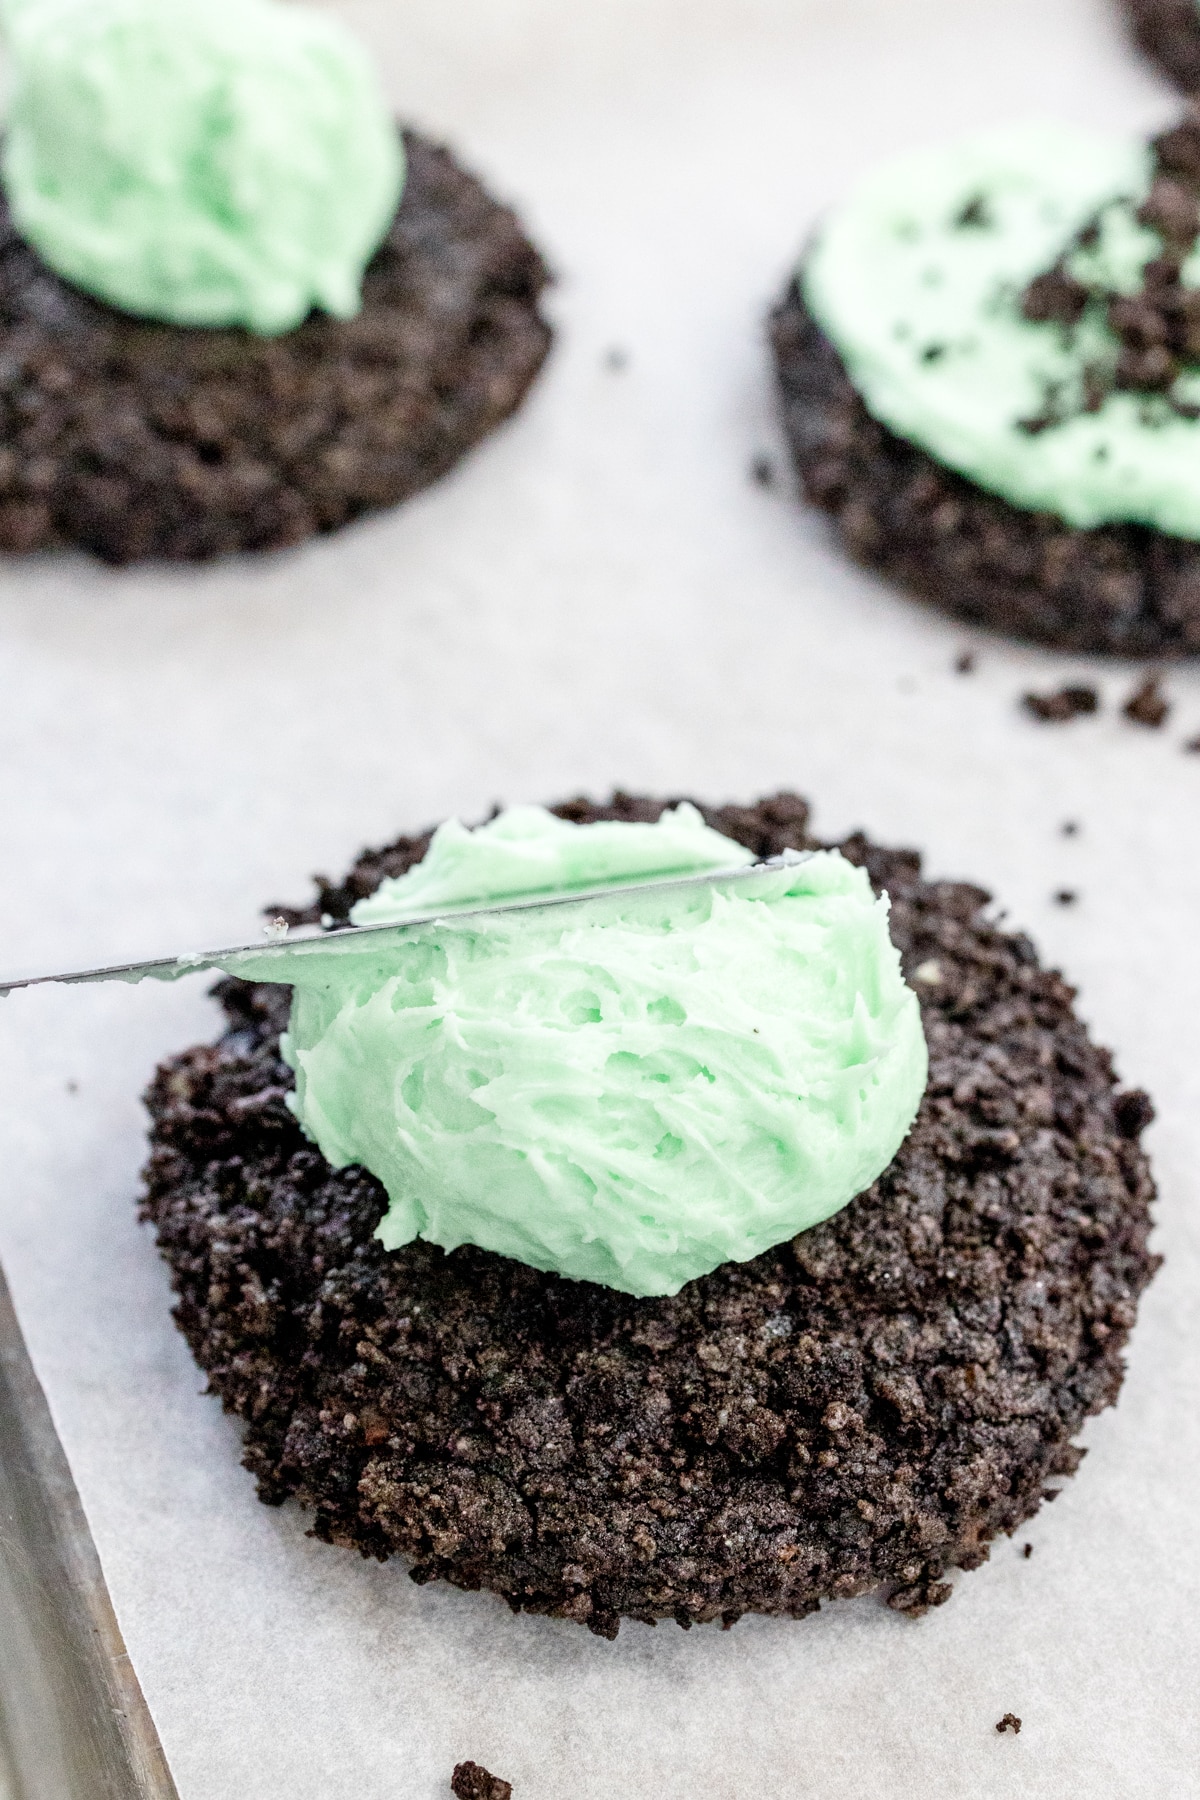 Close up of a butterknife spreading mint frosting onto a mint oreo cookie.